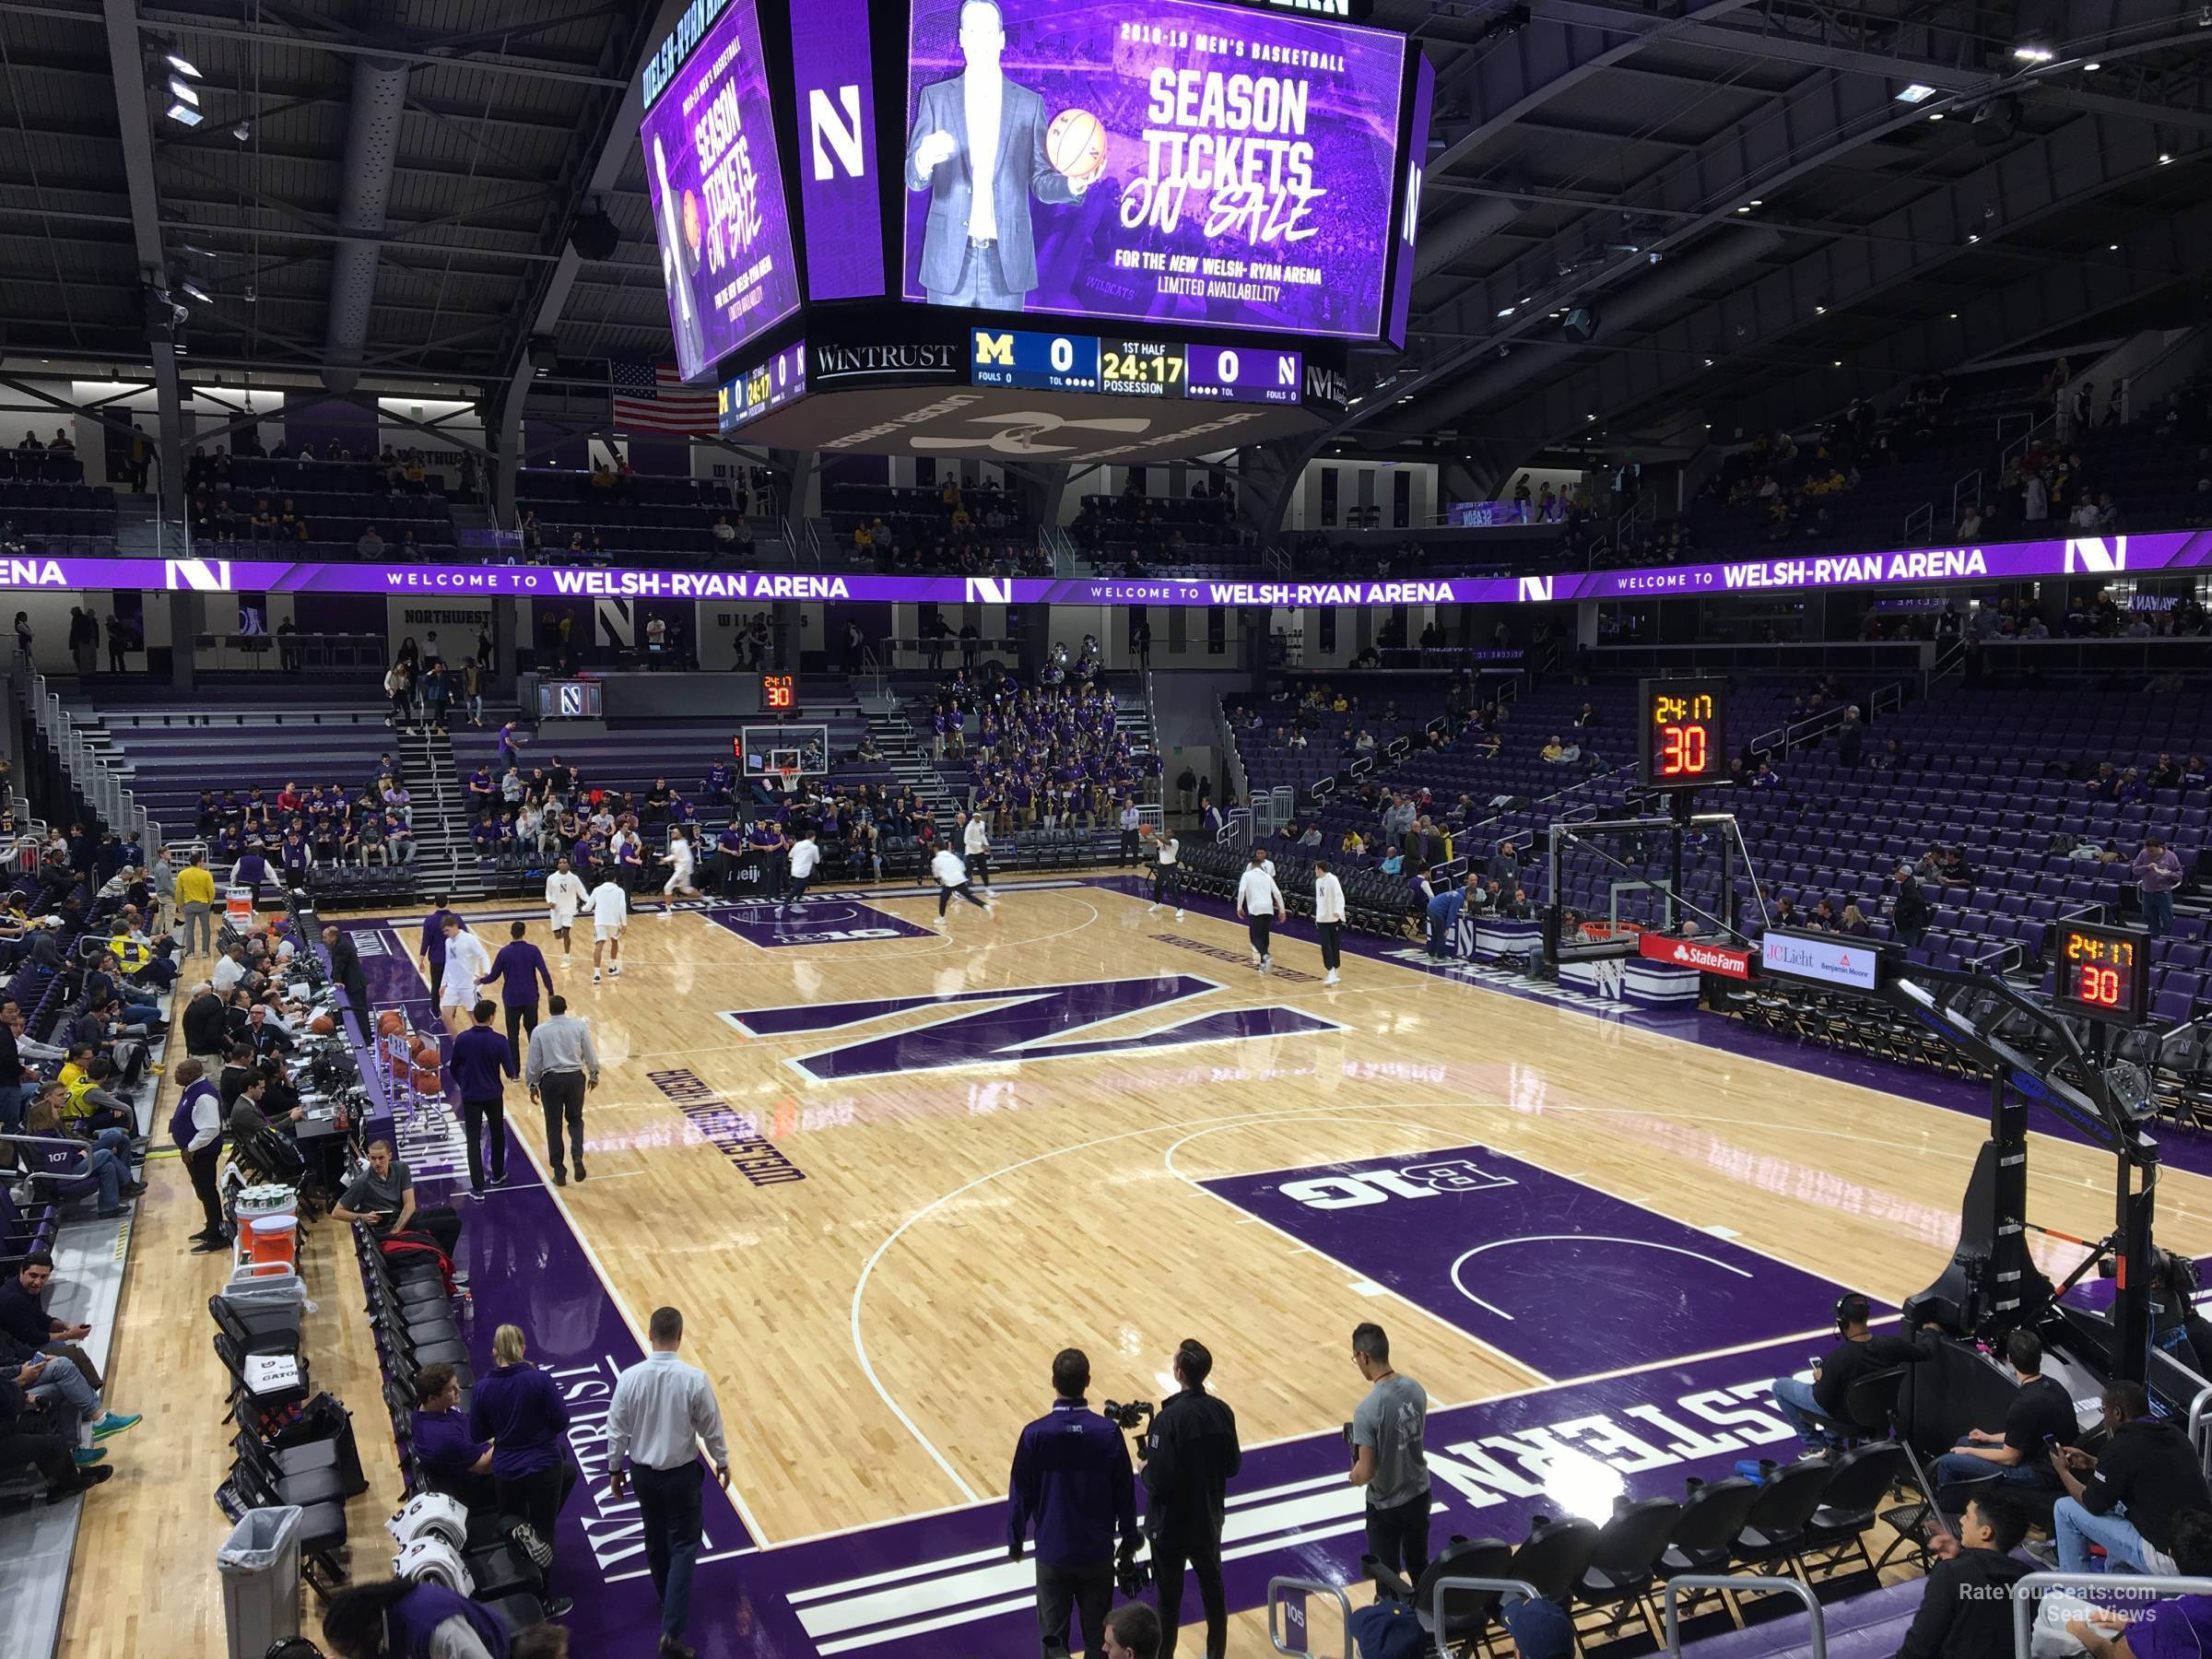 section 105, row 12 seat view  - welsh-ryan arena